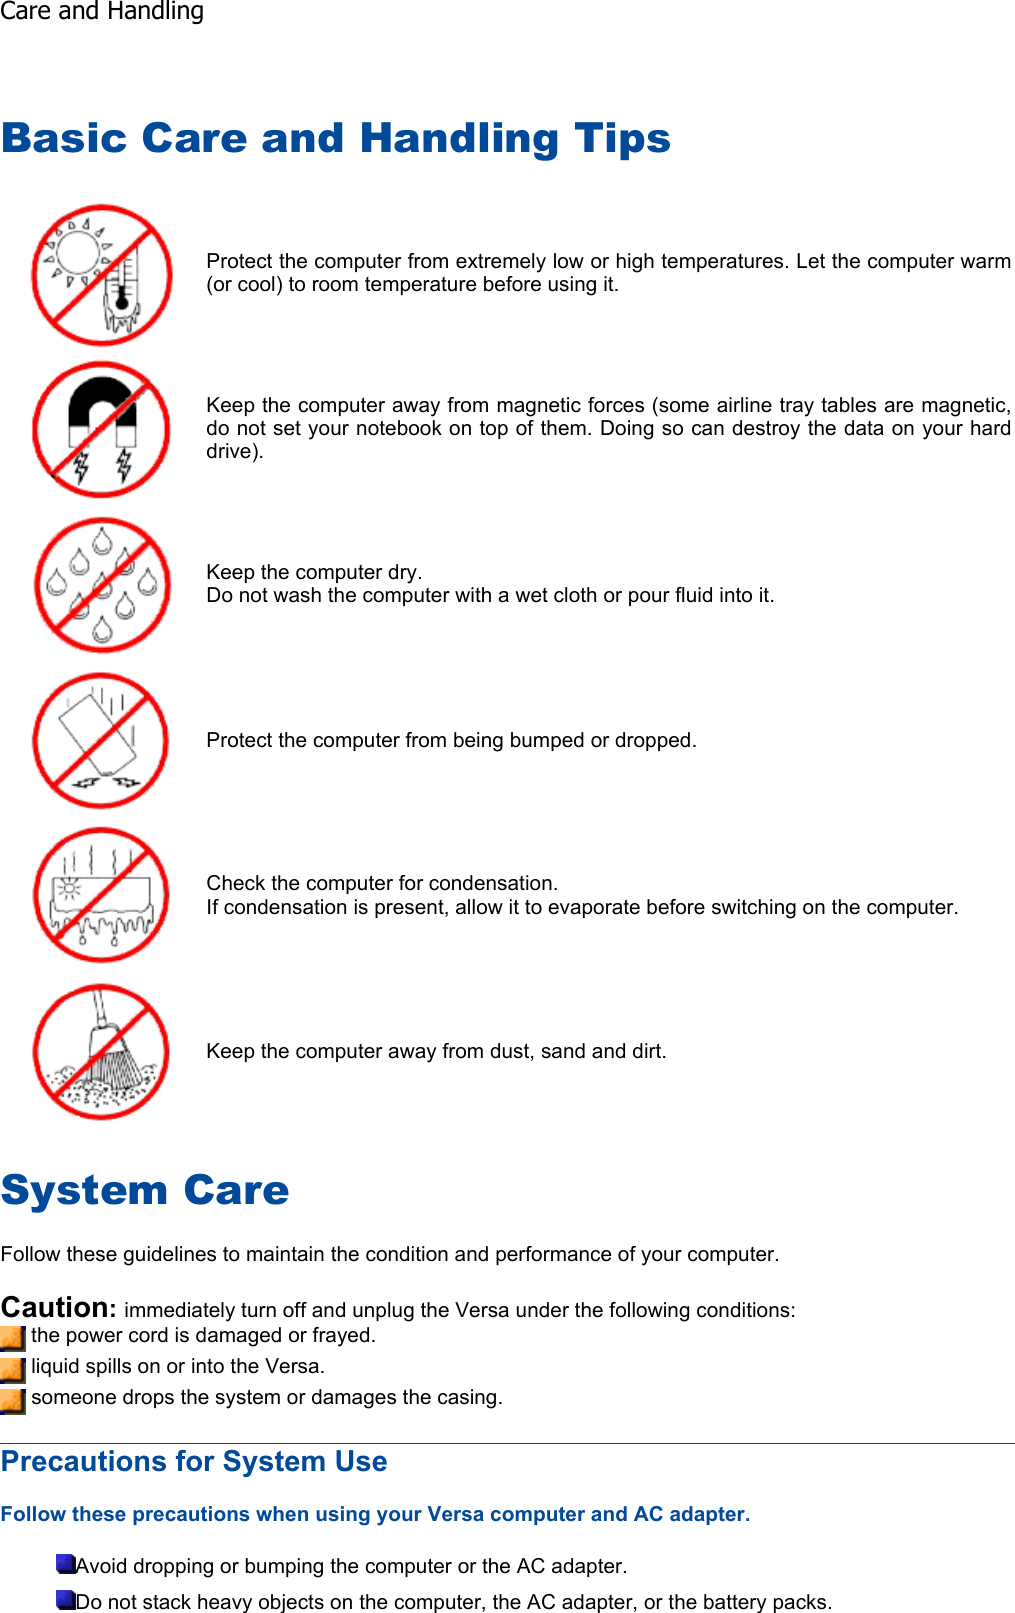 Basic Care and Handling Tips System Care Follow these guidelines to maintain the condition and performance of your computer. Caution:immediately turn off and unplug the Versa under the following conditions:  the power cord is damaged or frayed.  liquid spills on or into the Versa.  someone drops the system or damages the casing. Precautions for System Use Follow these precautions when using your Versa computer and AC adapter. Avoid dropping or bumping the computer or the AC adapter. Do not stack heavy objects on the computer, the AC adapter, or the battery packs. Protect the computer from extremely low or high temperatures. Let the computer warm (or cool) to room temperature before using it. Keep the computer away from magnetic forces (some airline tray tables are magnetic, do not set your notebook on top of them. Doing so can destroy the data on your hard drive). Keep the computer dry. Do not wash the computer with a wet cloth or pour fluid into it. Protect the computer from being bumped or dropped. Check the computer for condensation. If condensation is present, allow it to evaporate before switching on the computer. Keep the computer away from dust, sand and dirt. Care and Handling